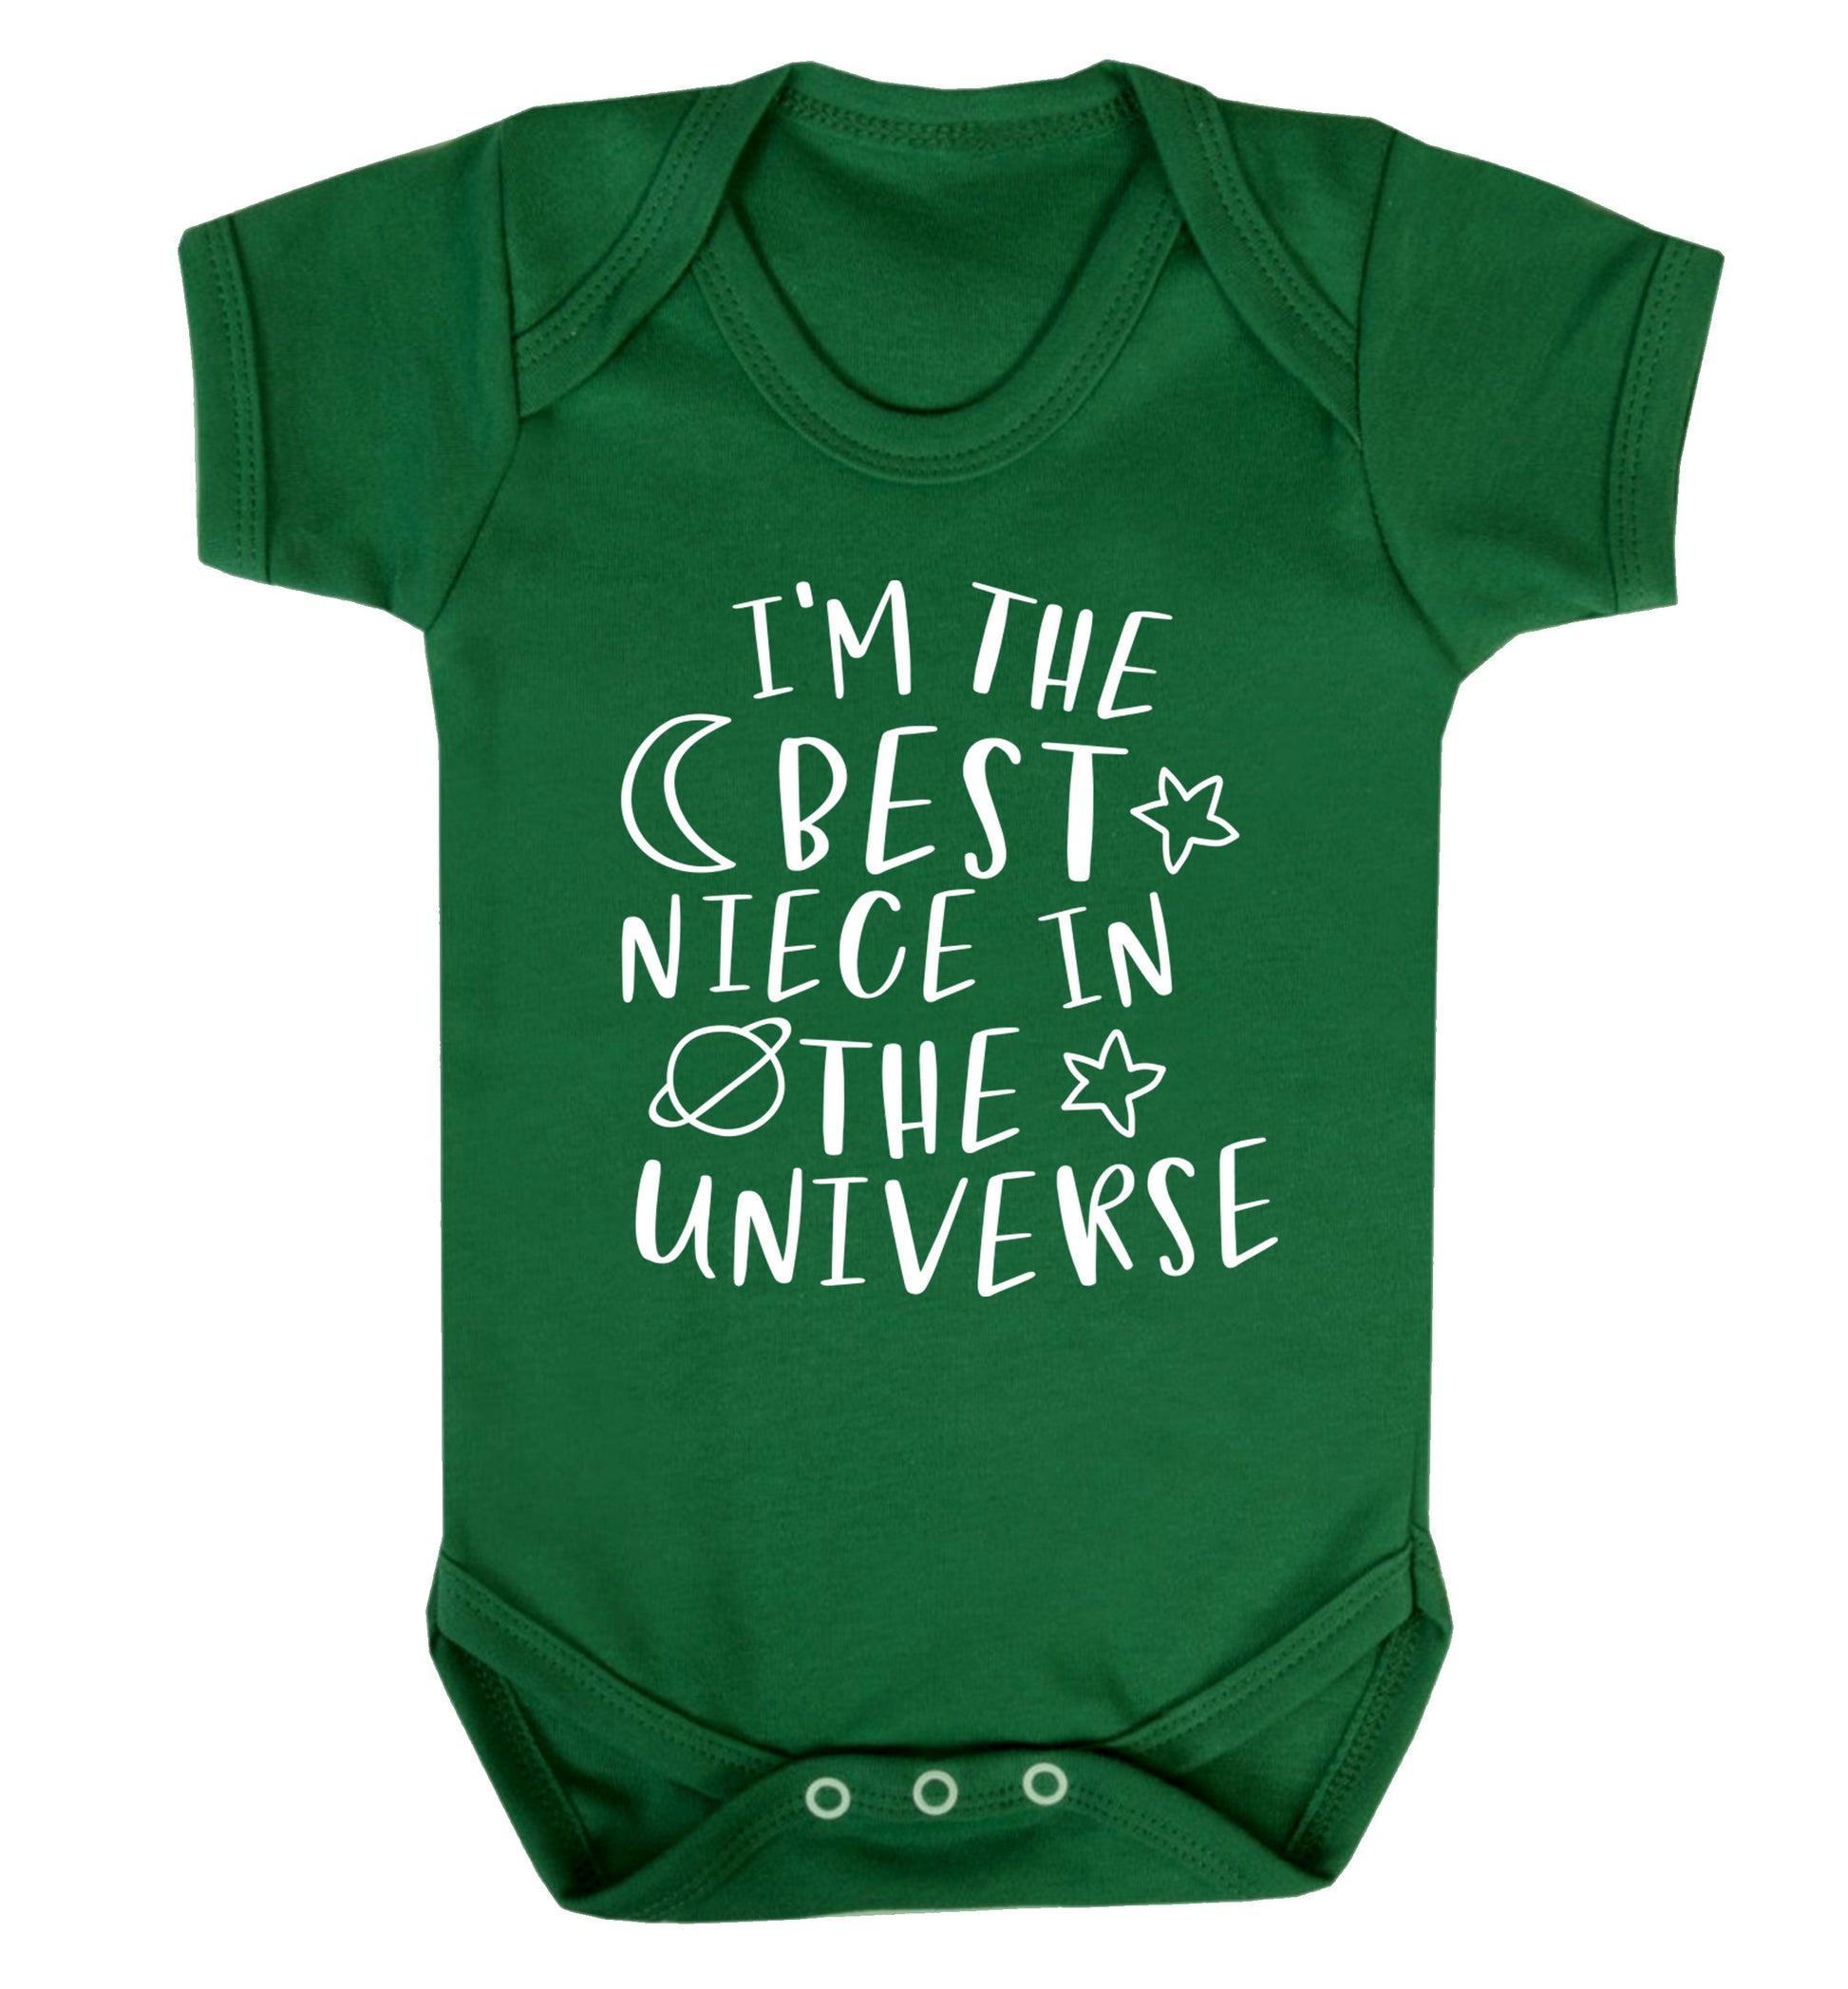 I'm the best niece in the universe Baby Vest green 18-24 months